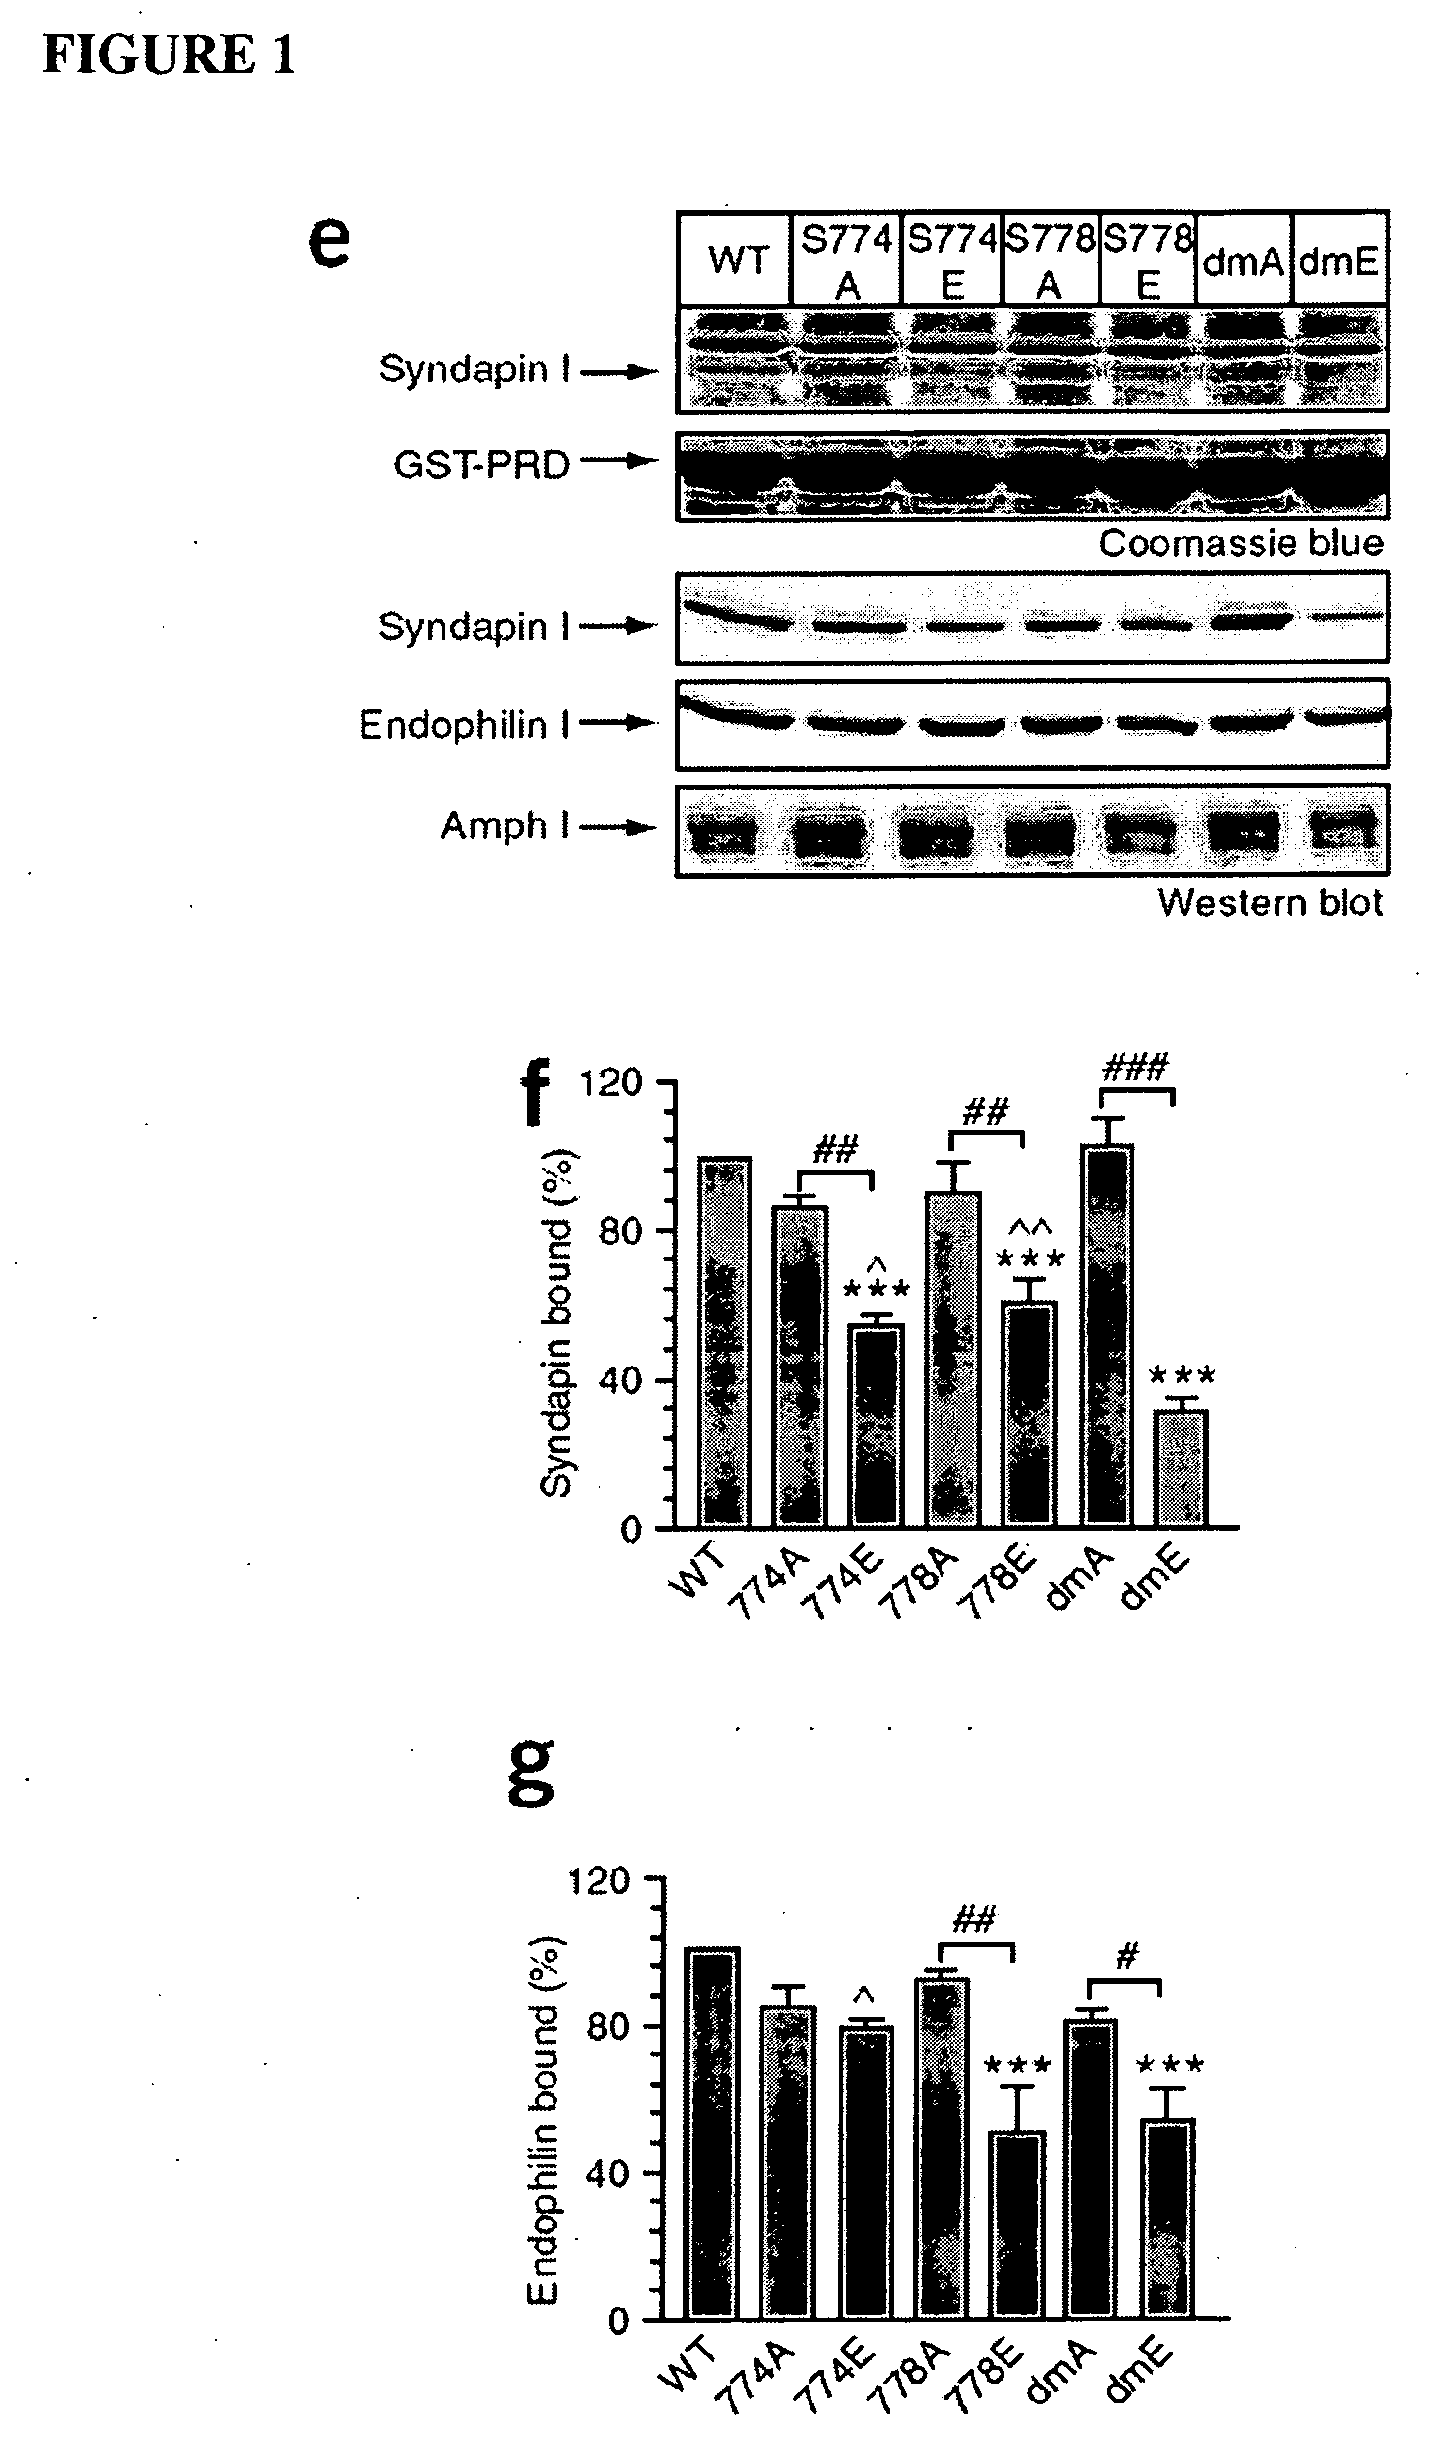 Agents for prophylaxis or treatment of neurological related diseases and conditions